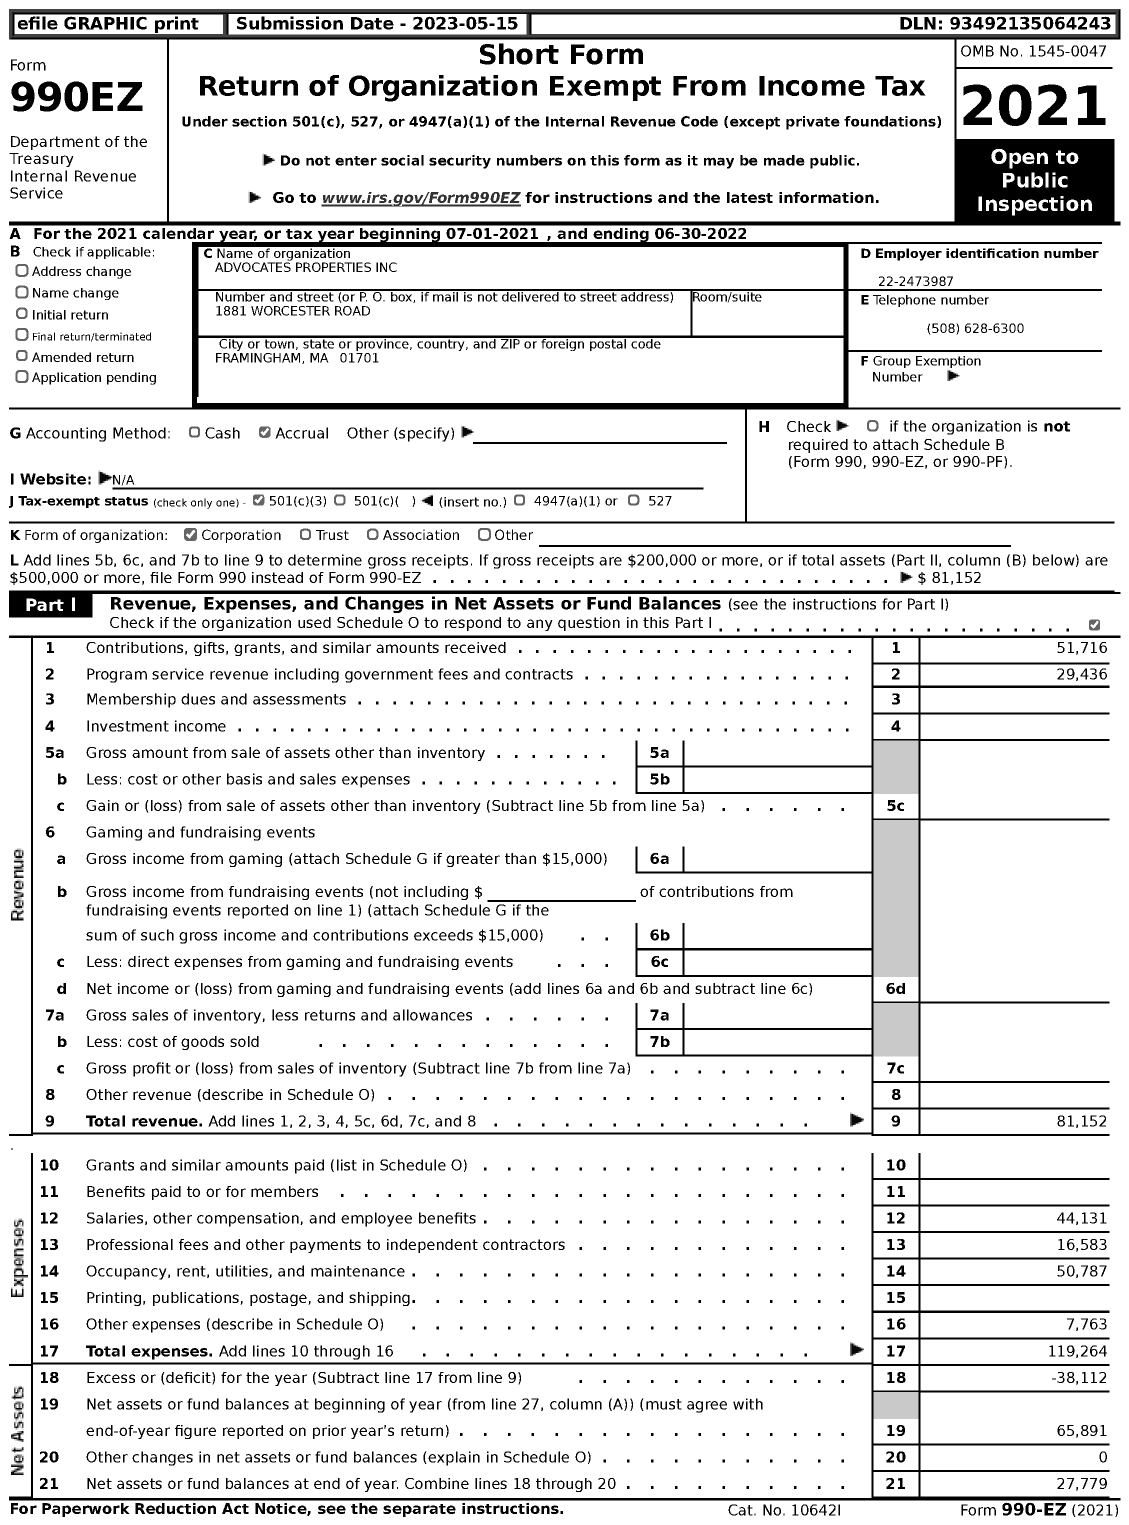 Image of first page of 2021 Form 990EZ for Advocates Properties